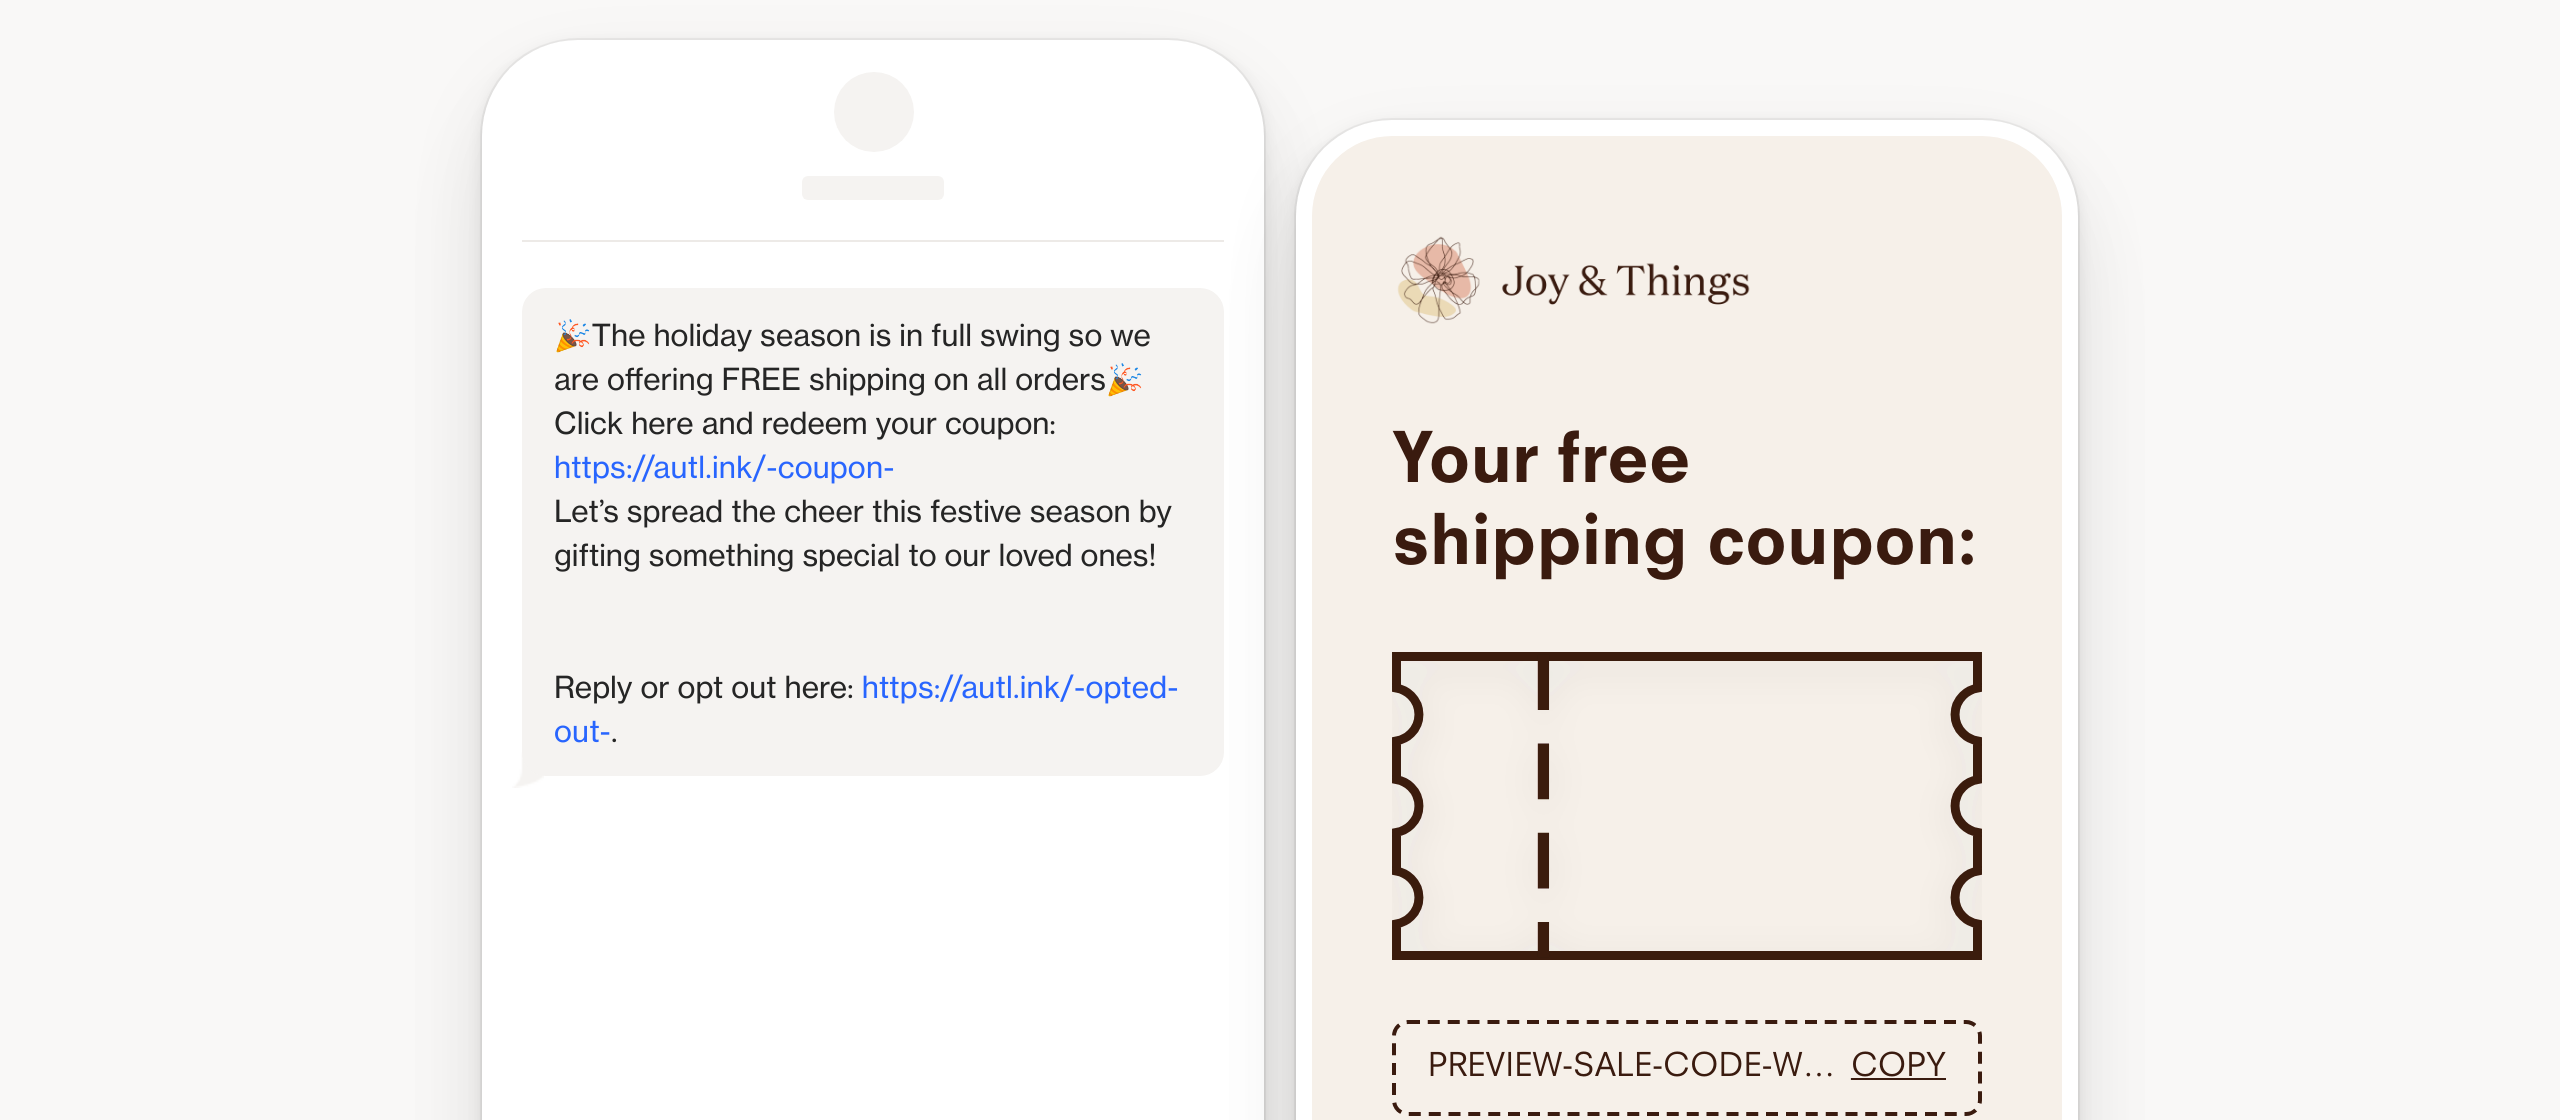 SMS free holiday shipping